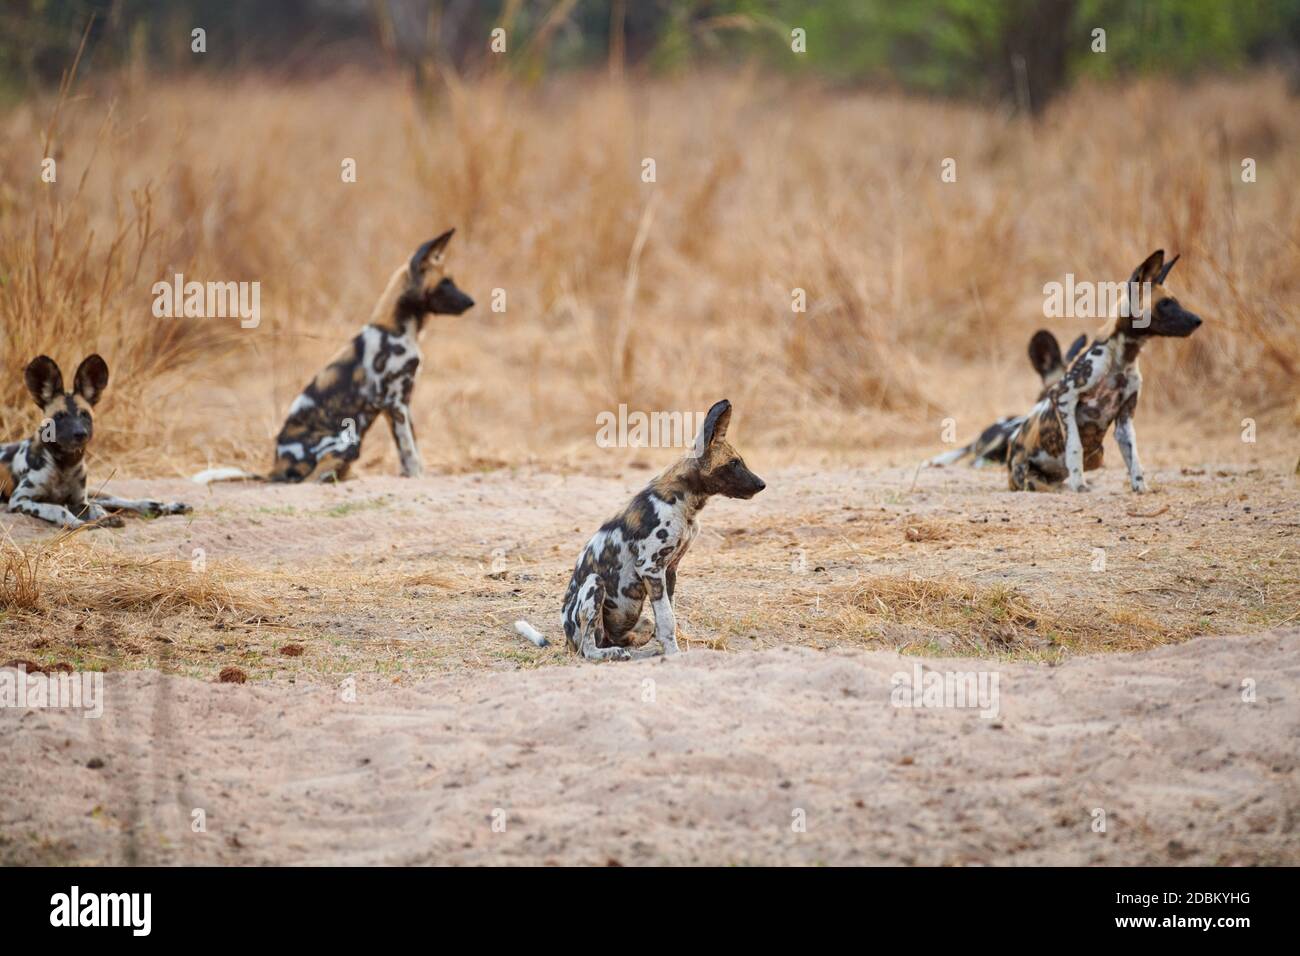 pack of African wild dog (Lycaon pictus) or painted dog, South Luangwa National Park, Mfuwe, Zambia, Africa Stock Photo